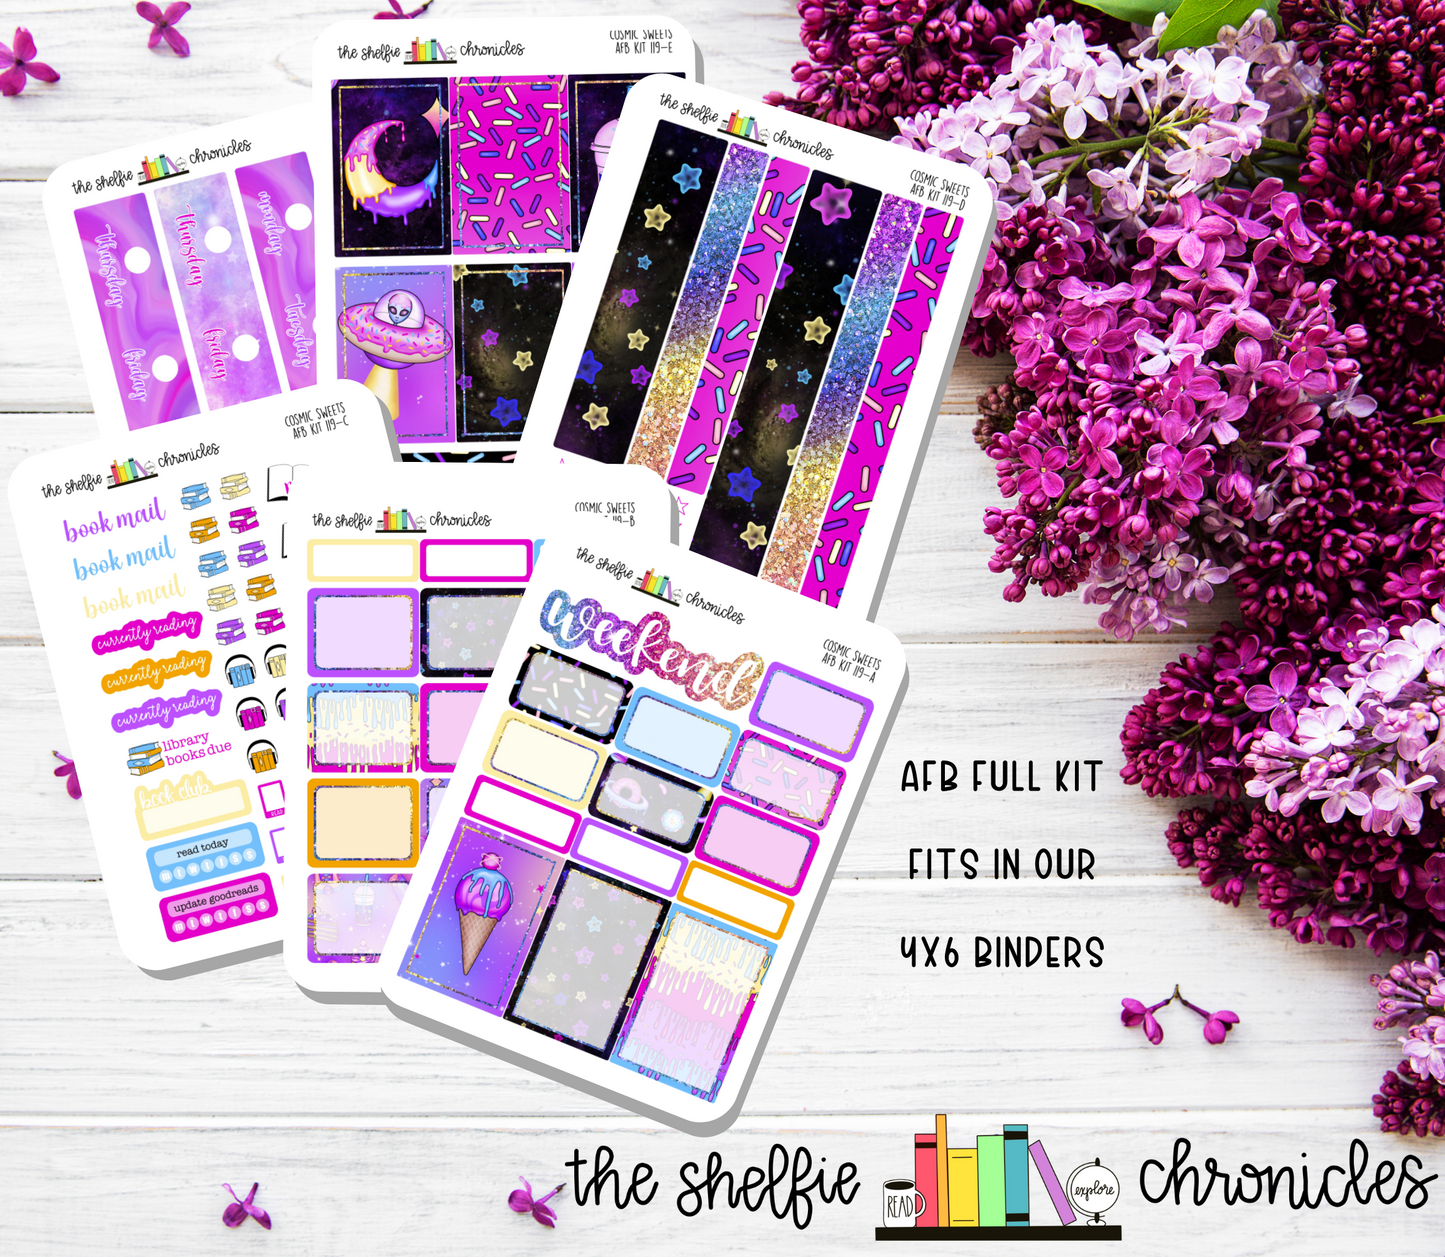 AFB Kit 119 - Cosmic Sweets - Made To Fit The 2023 Always Fully Booked Planner - Die Cut Stickers - Repositionable